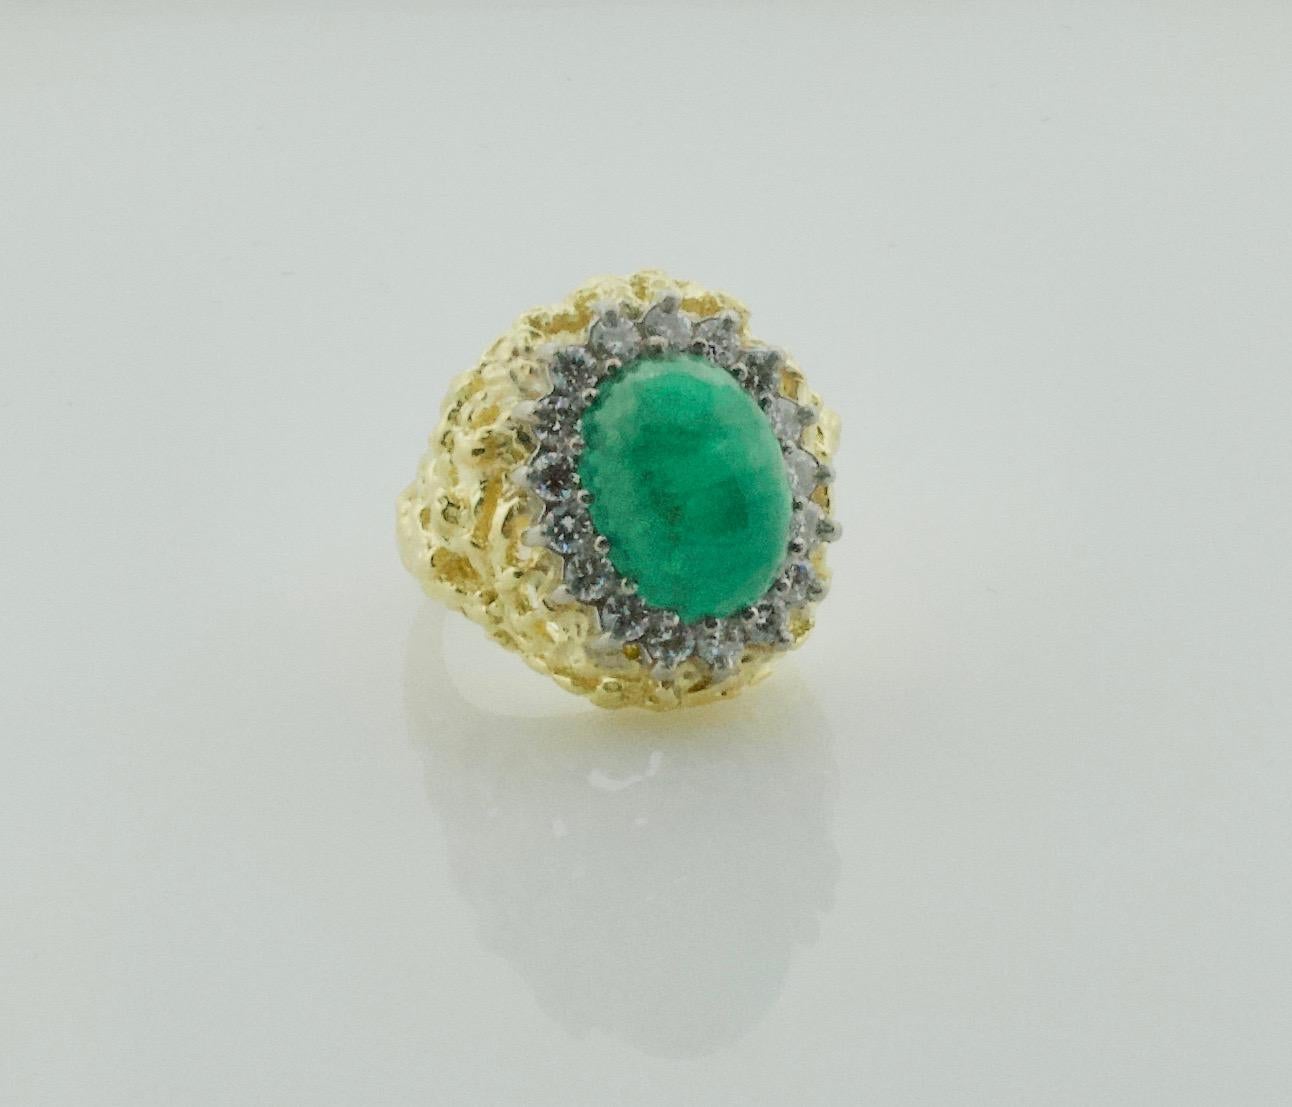 Cabochon Emerald and Diamond Ring in 18 Karat Yellow Gold, circa 1960s For Sale 2